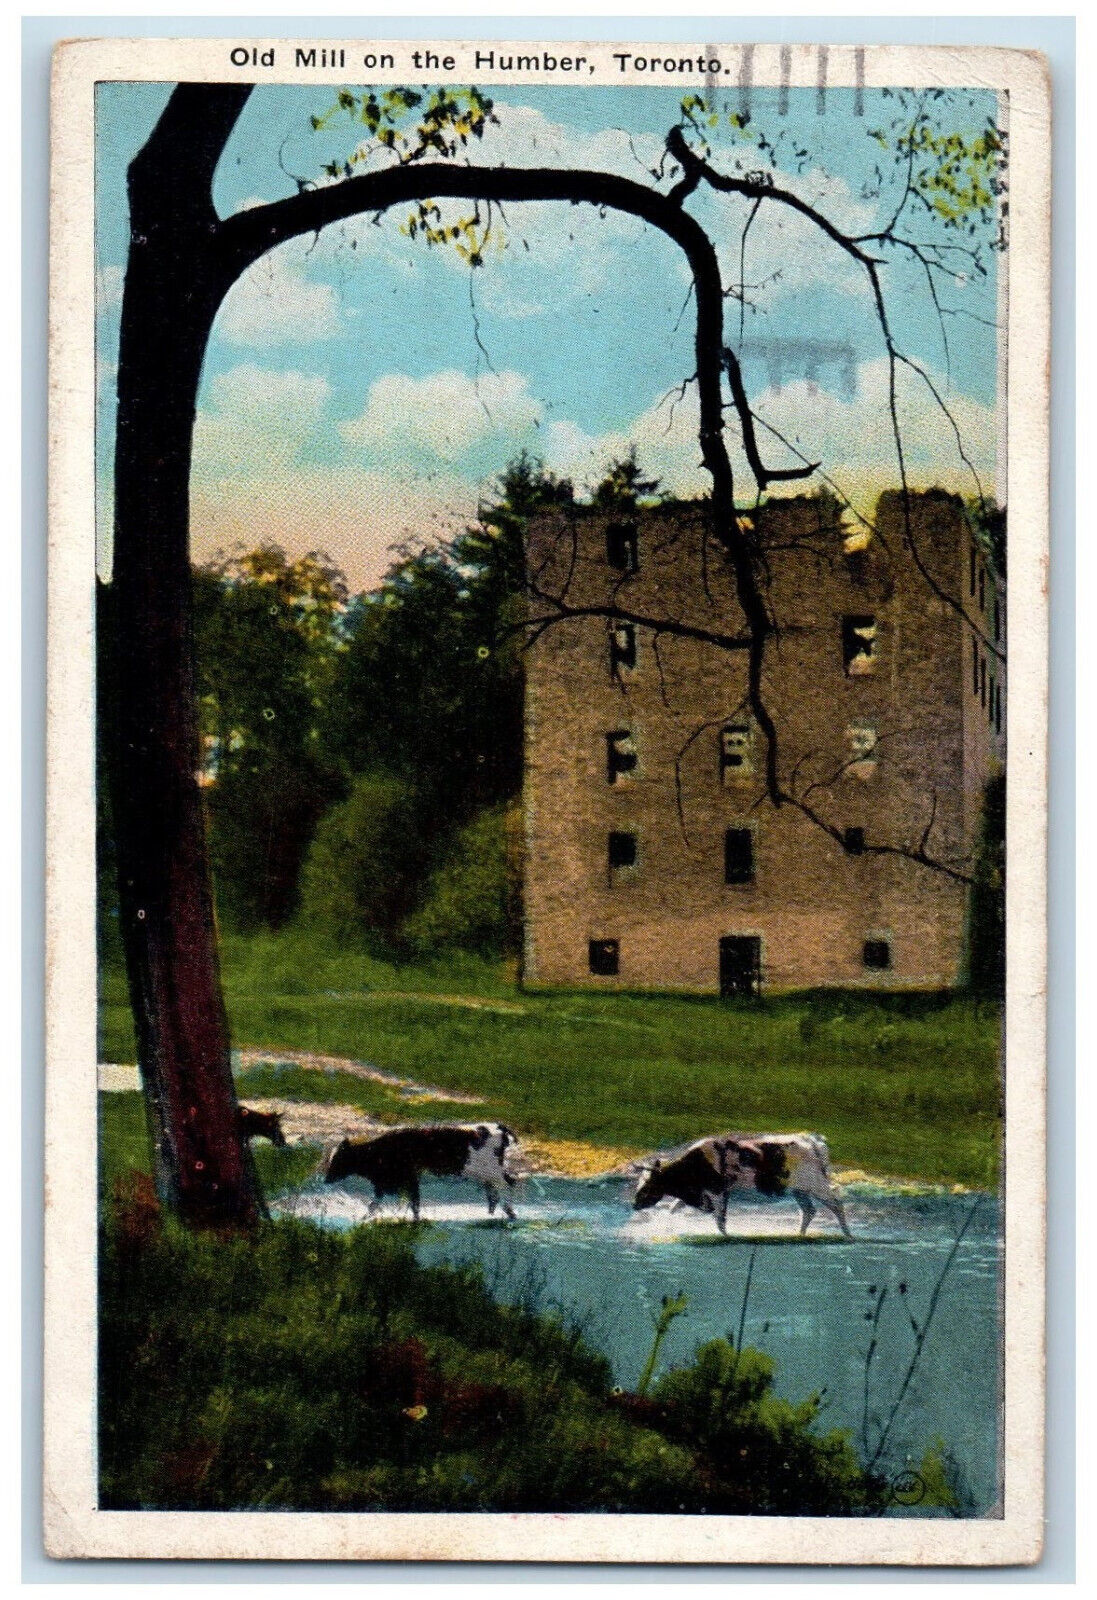 1925 Old Mill on the Humber Toronto Ontario Canada Vintage Posted Postcard